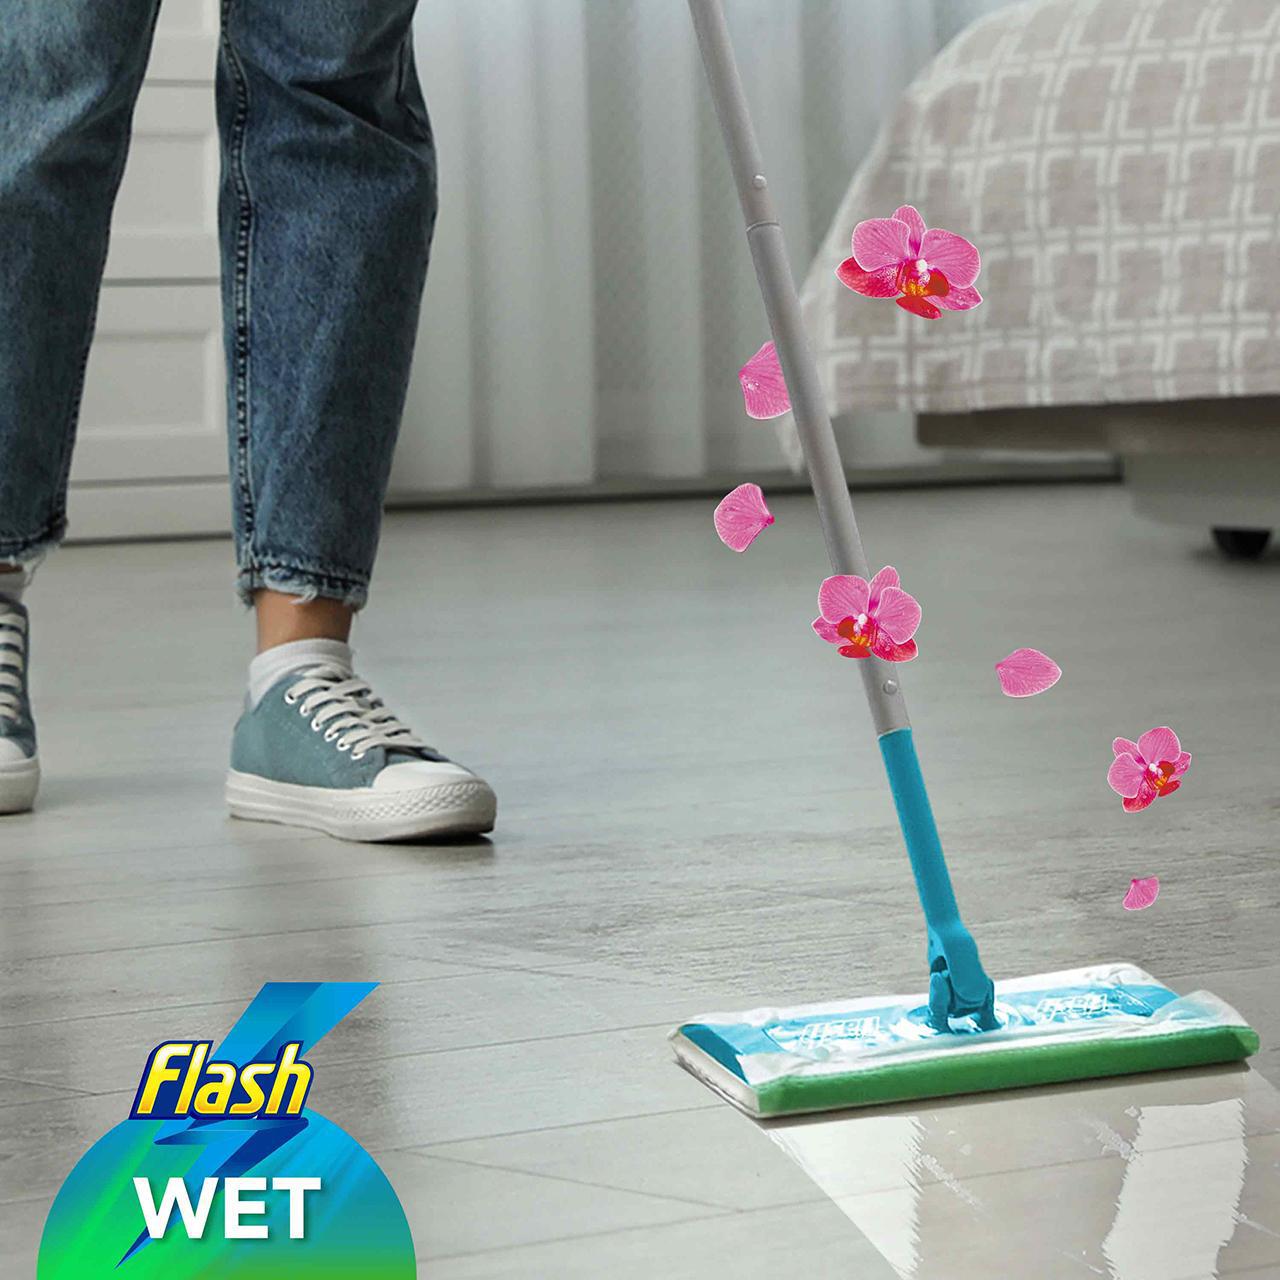 Flash Speed Mop Wet Cloth Multi-Surface Refills Wild Orchid 12 per pack